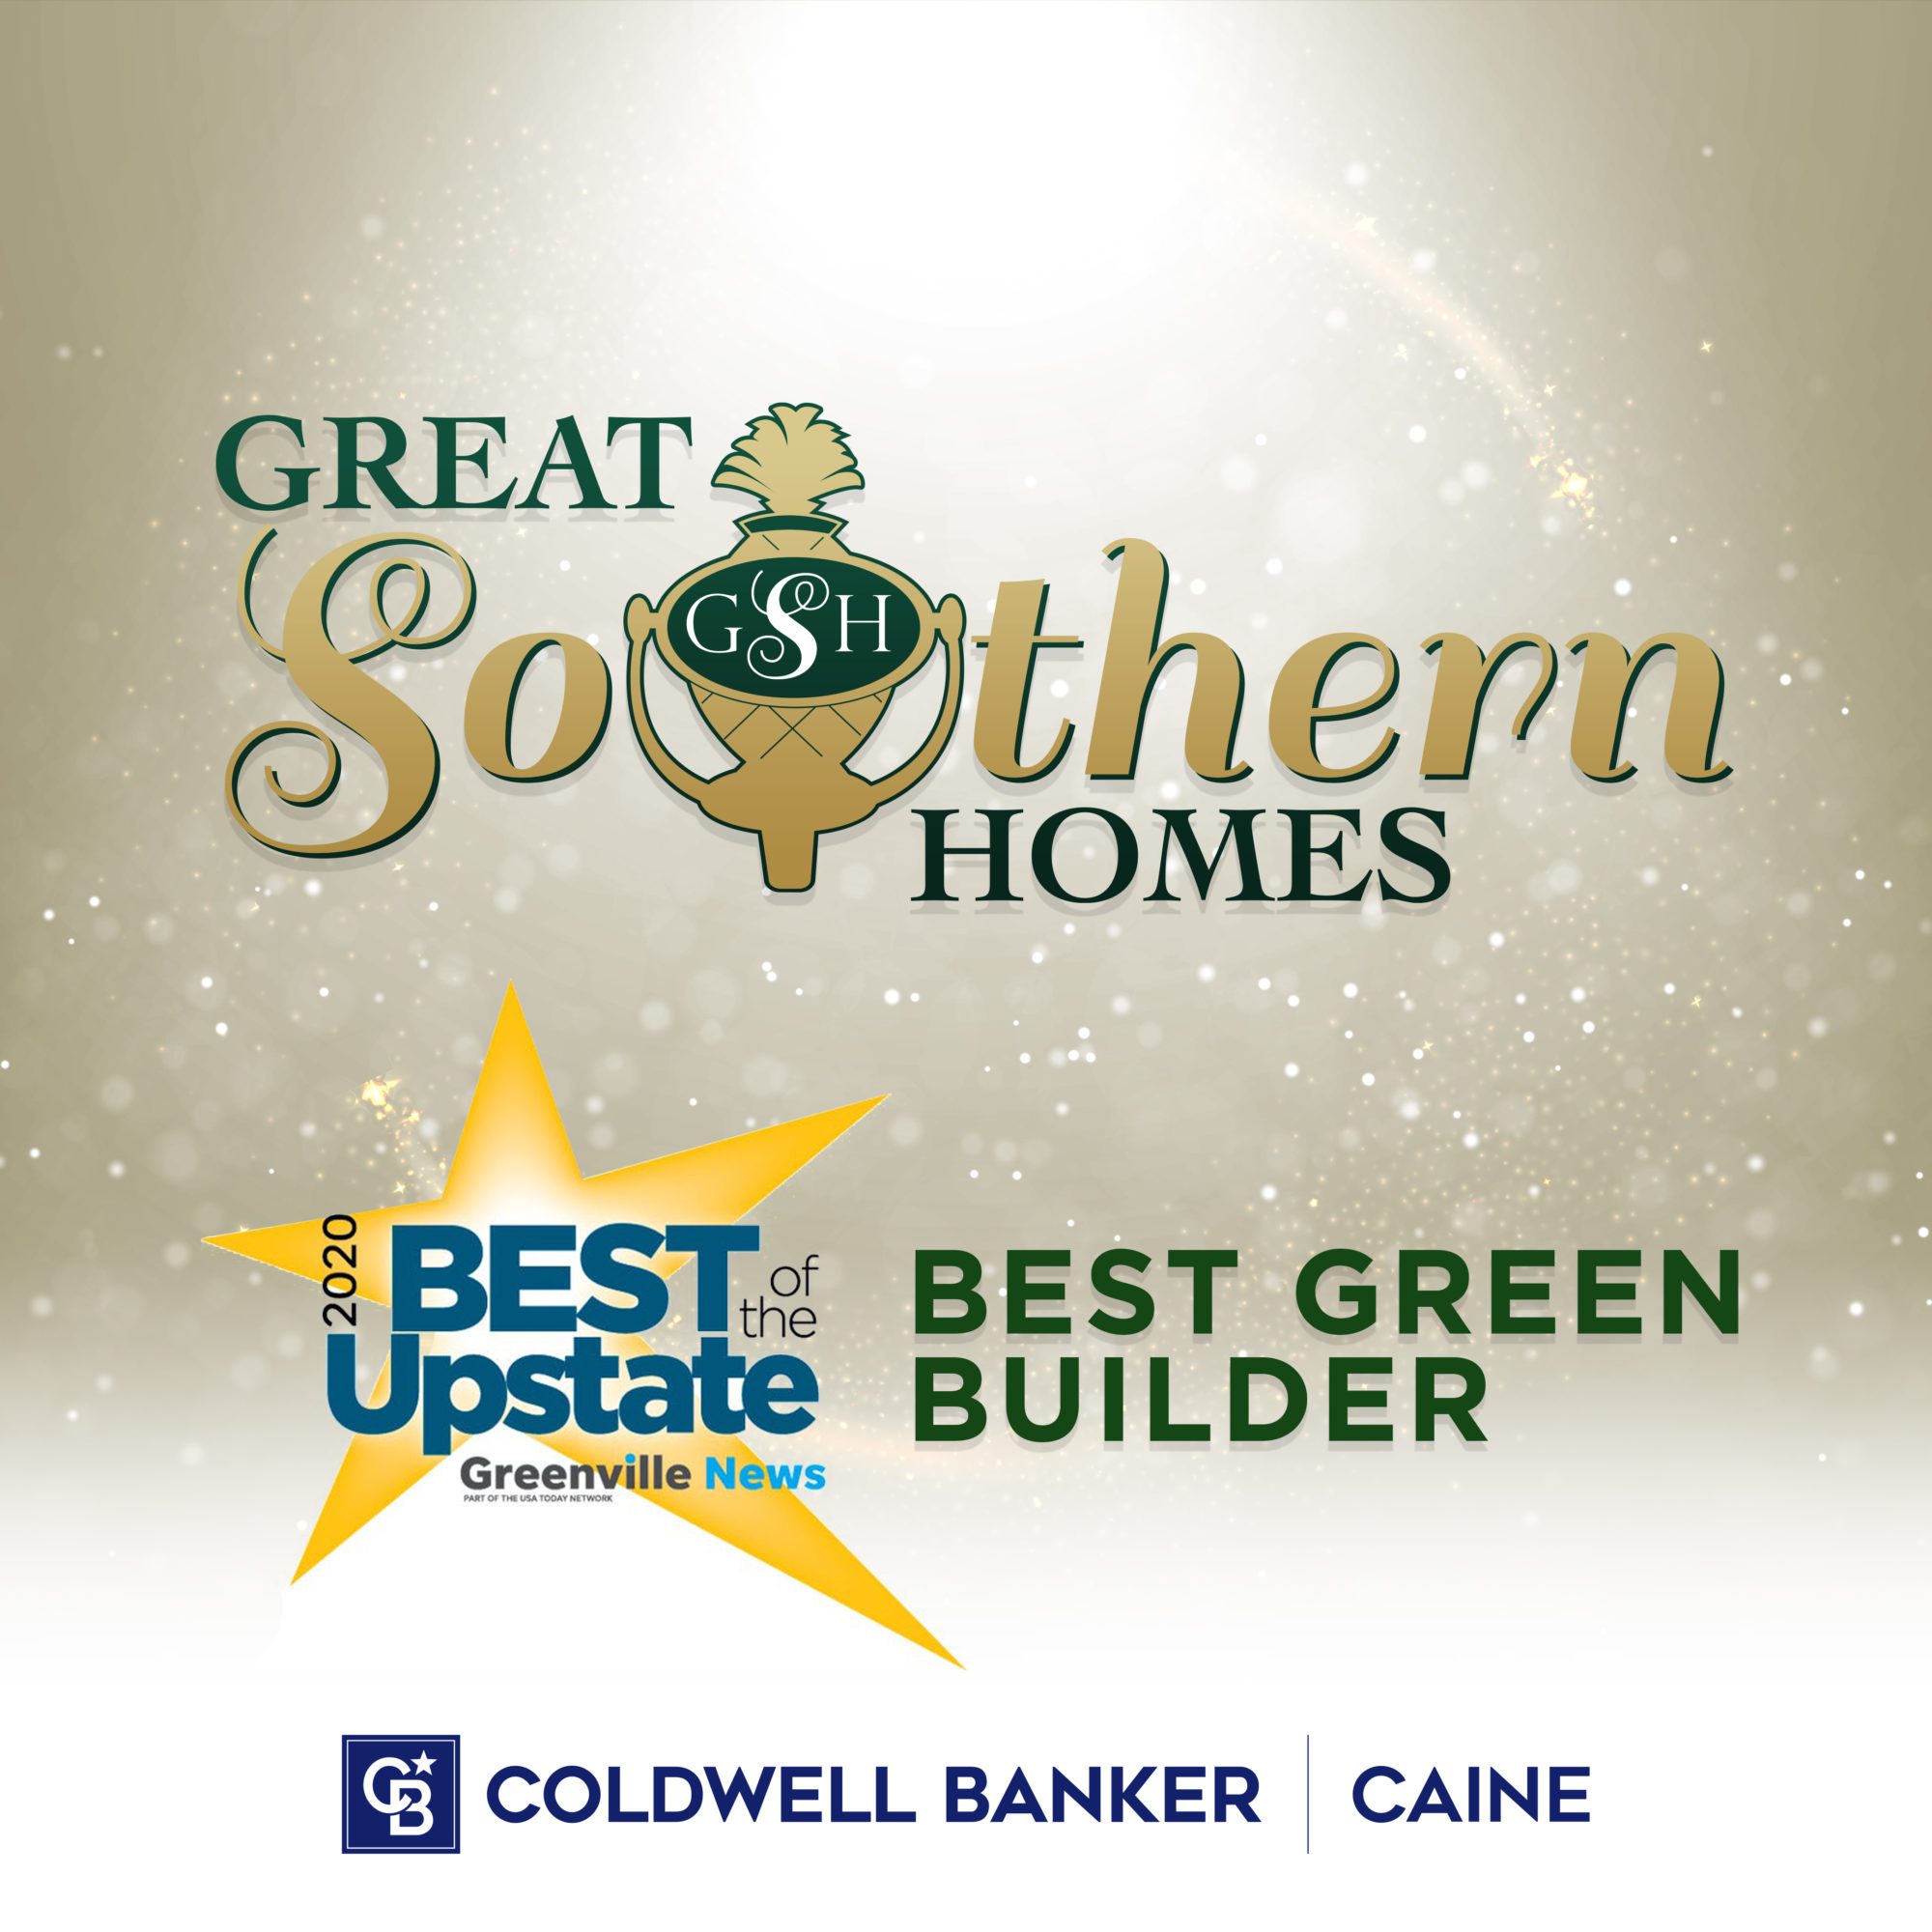 Great Southern Homes Again Named Best Green Builder by Greenville News Best of the Upstate Contest